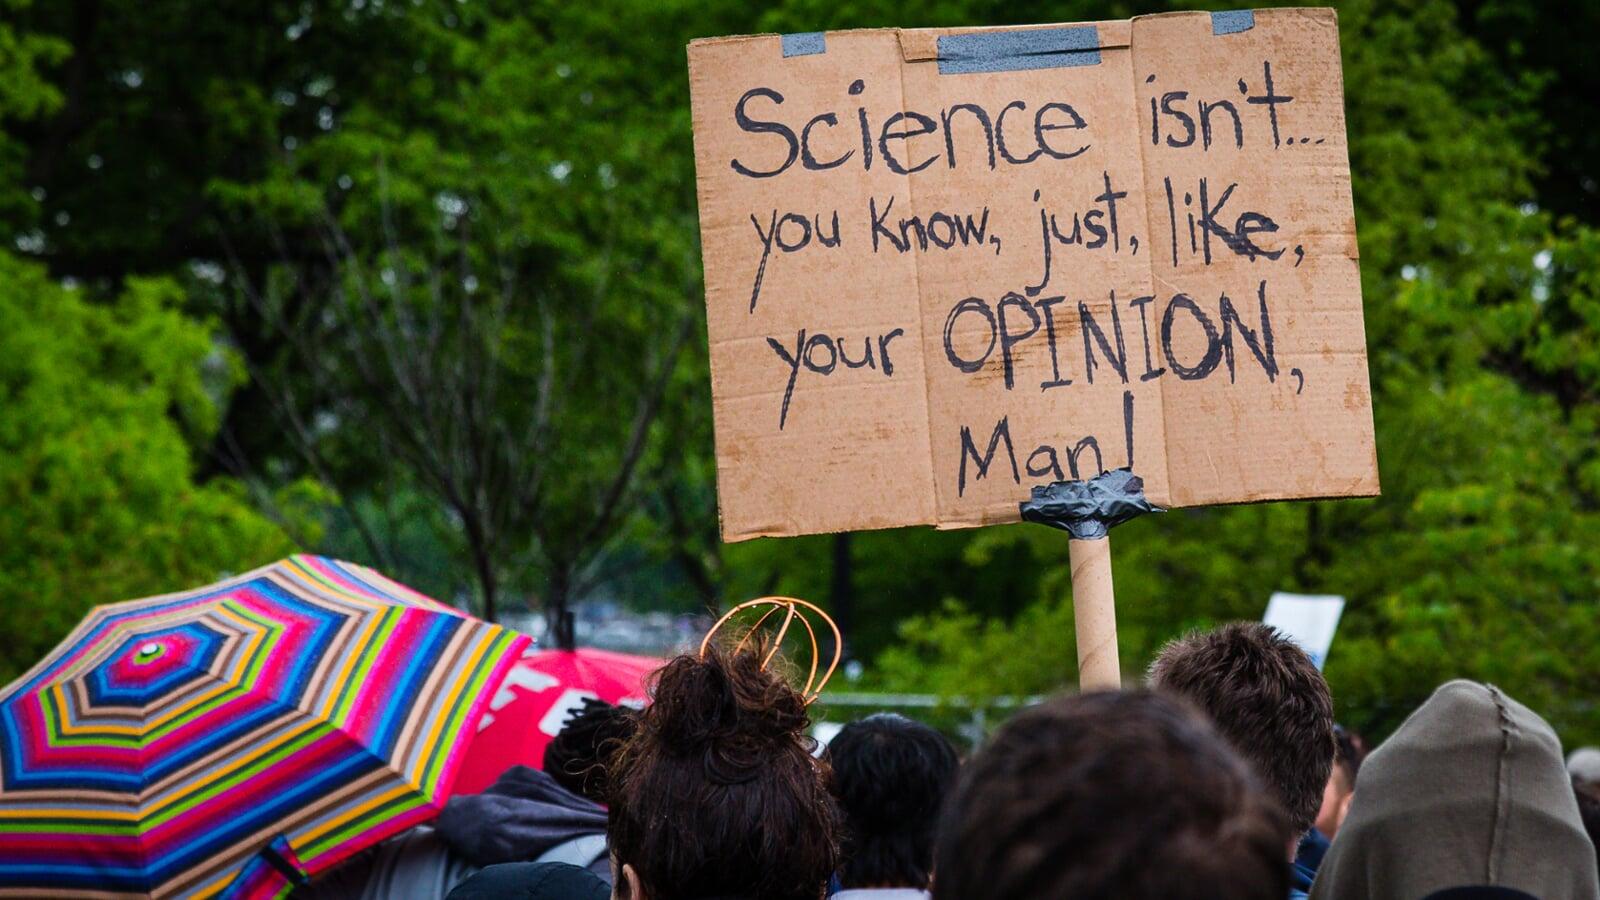 Cardboard-and-duct tape sign reading "Science, isn't ... you know, just, like, your OPINION, Man!"